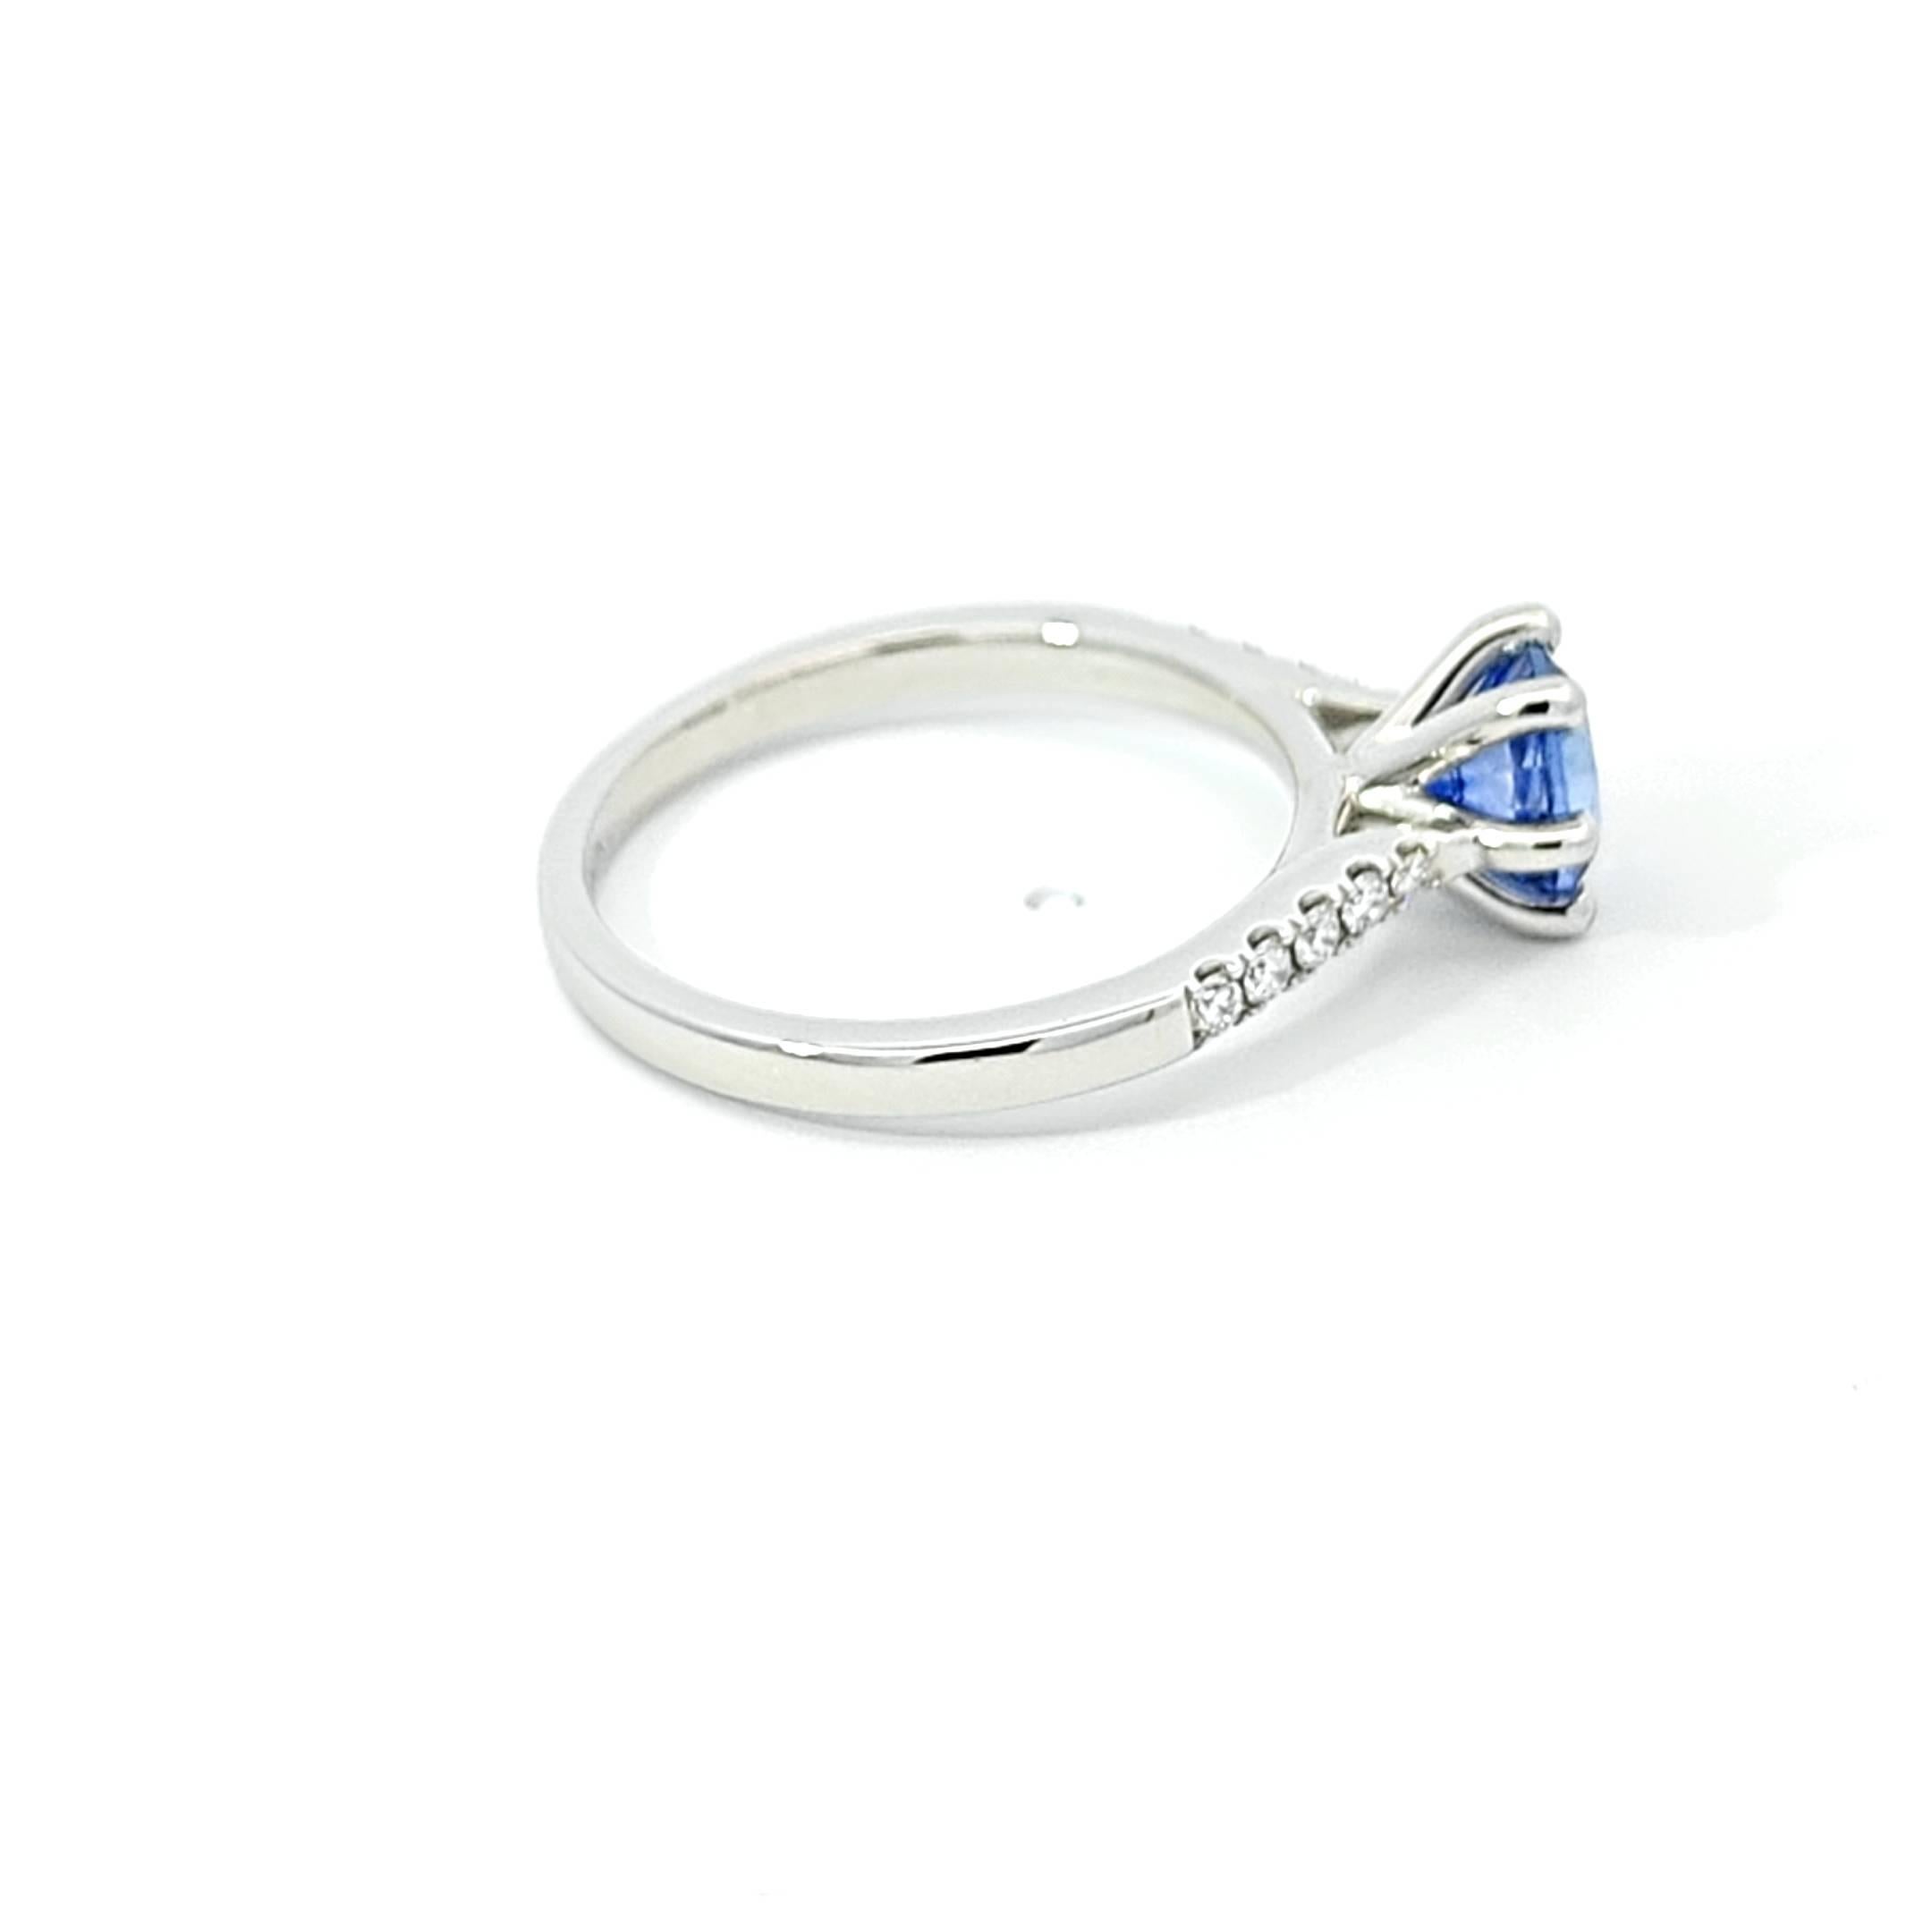 Women's Stunning PT950 Ring with Ceylon Blue Sapphire and White Diamonds. Certified For Sale